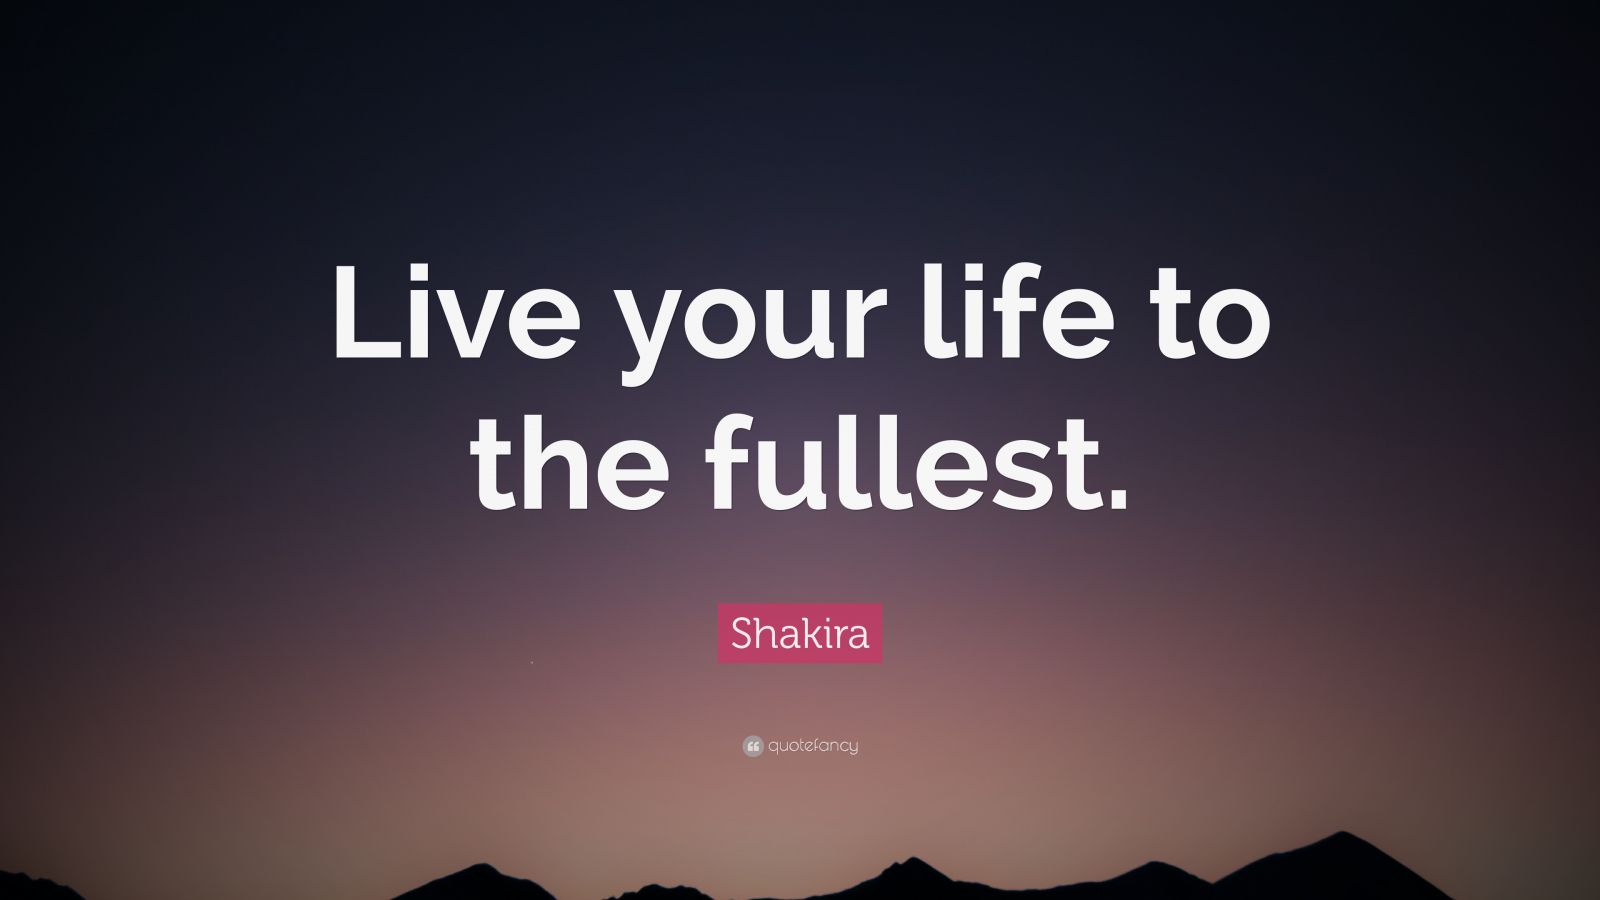 Shakira Quote: “Live your life to the fullest.” (12 wallpapers